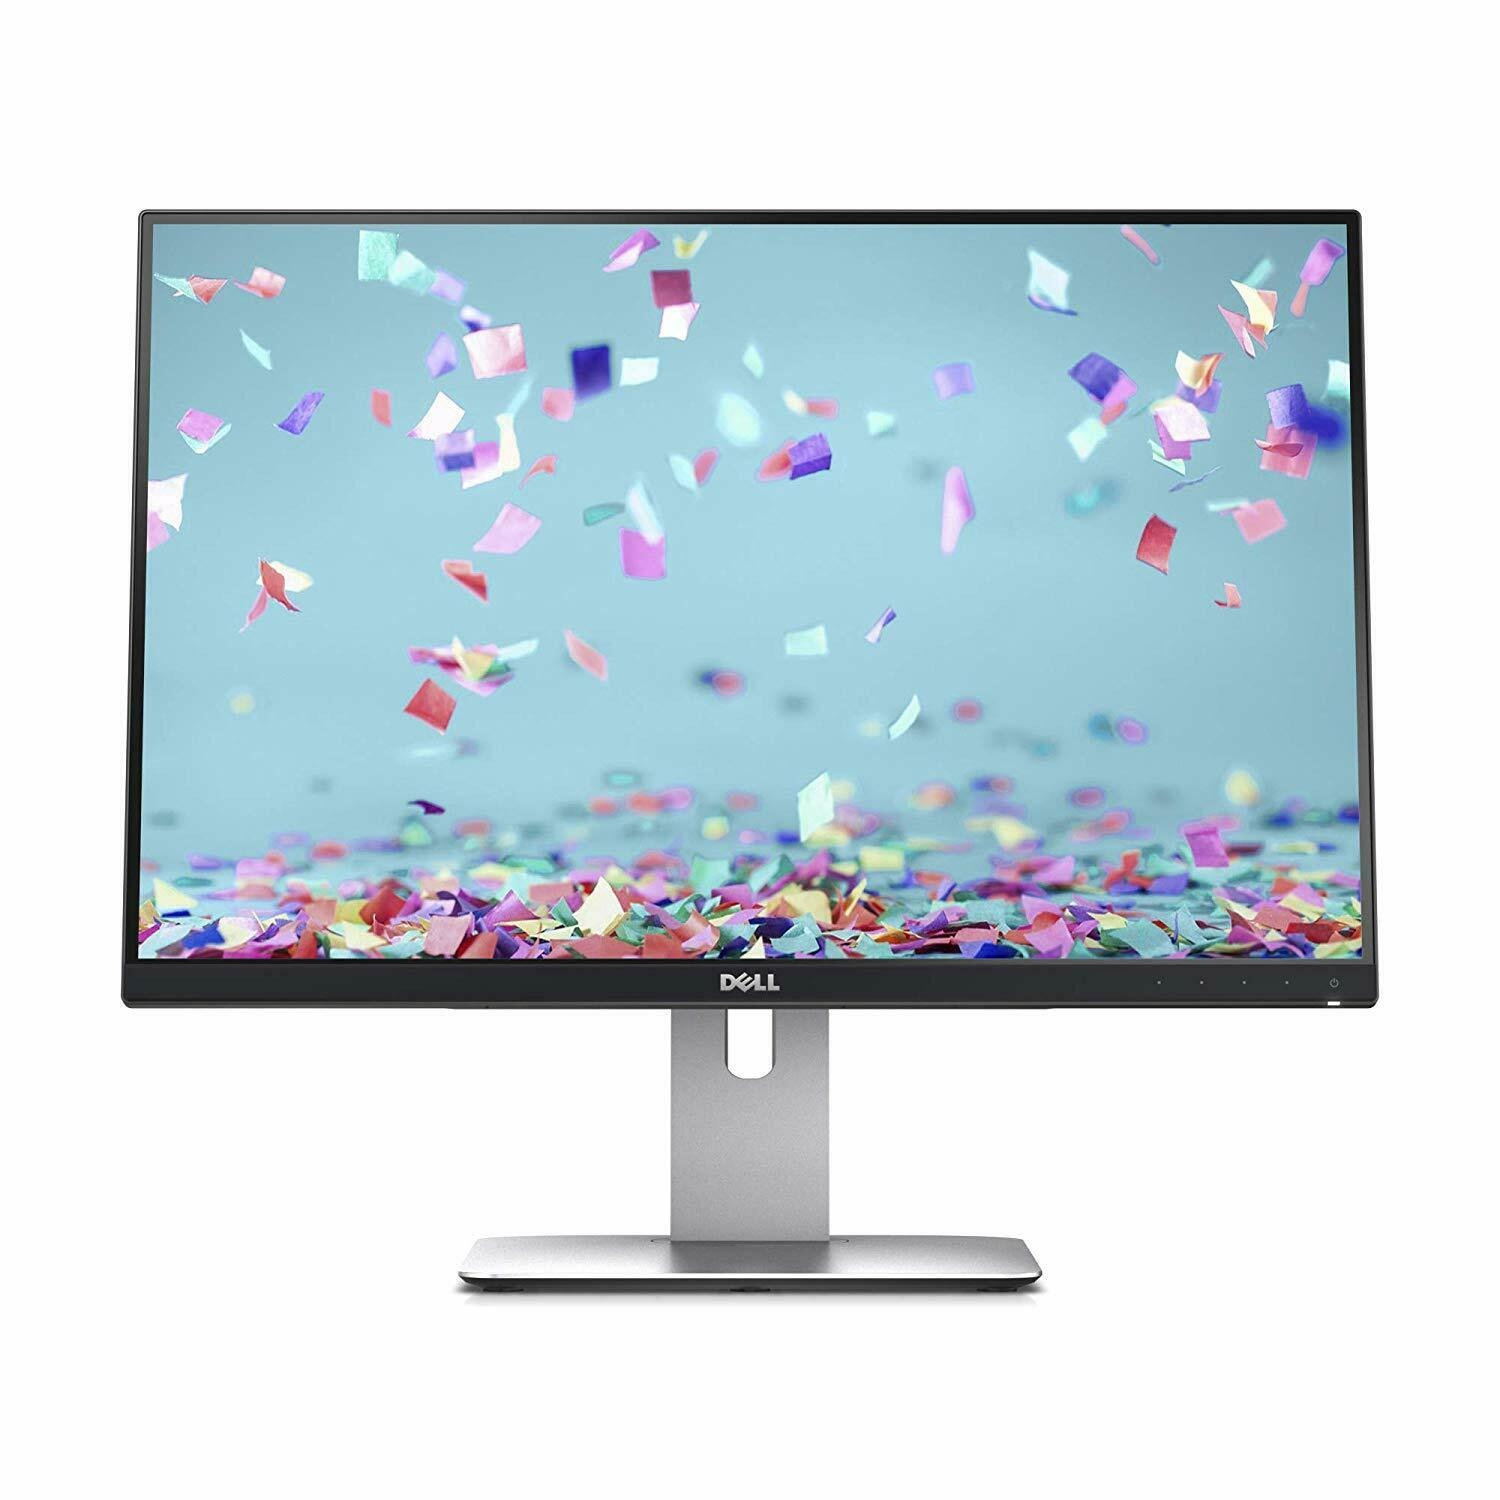 Dell 24 "P2411Hb 24 inch monitor display - BuyGreen